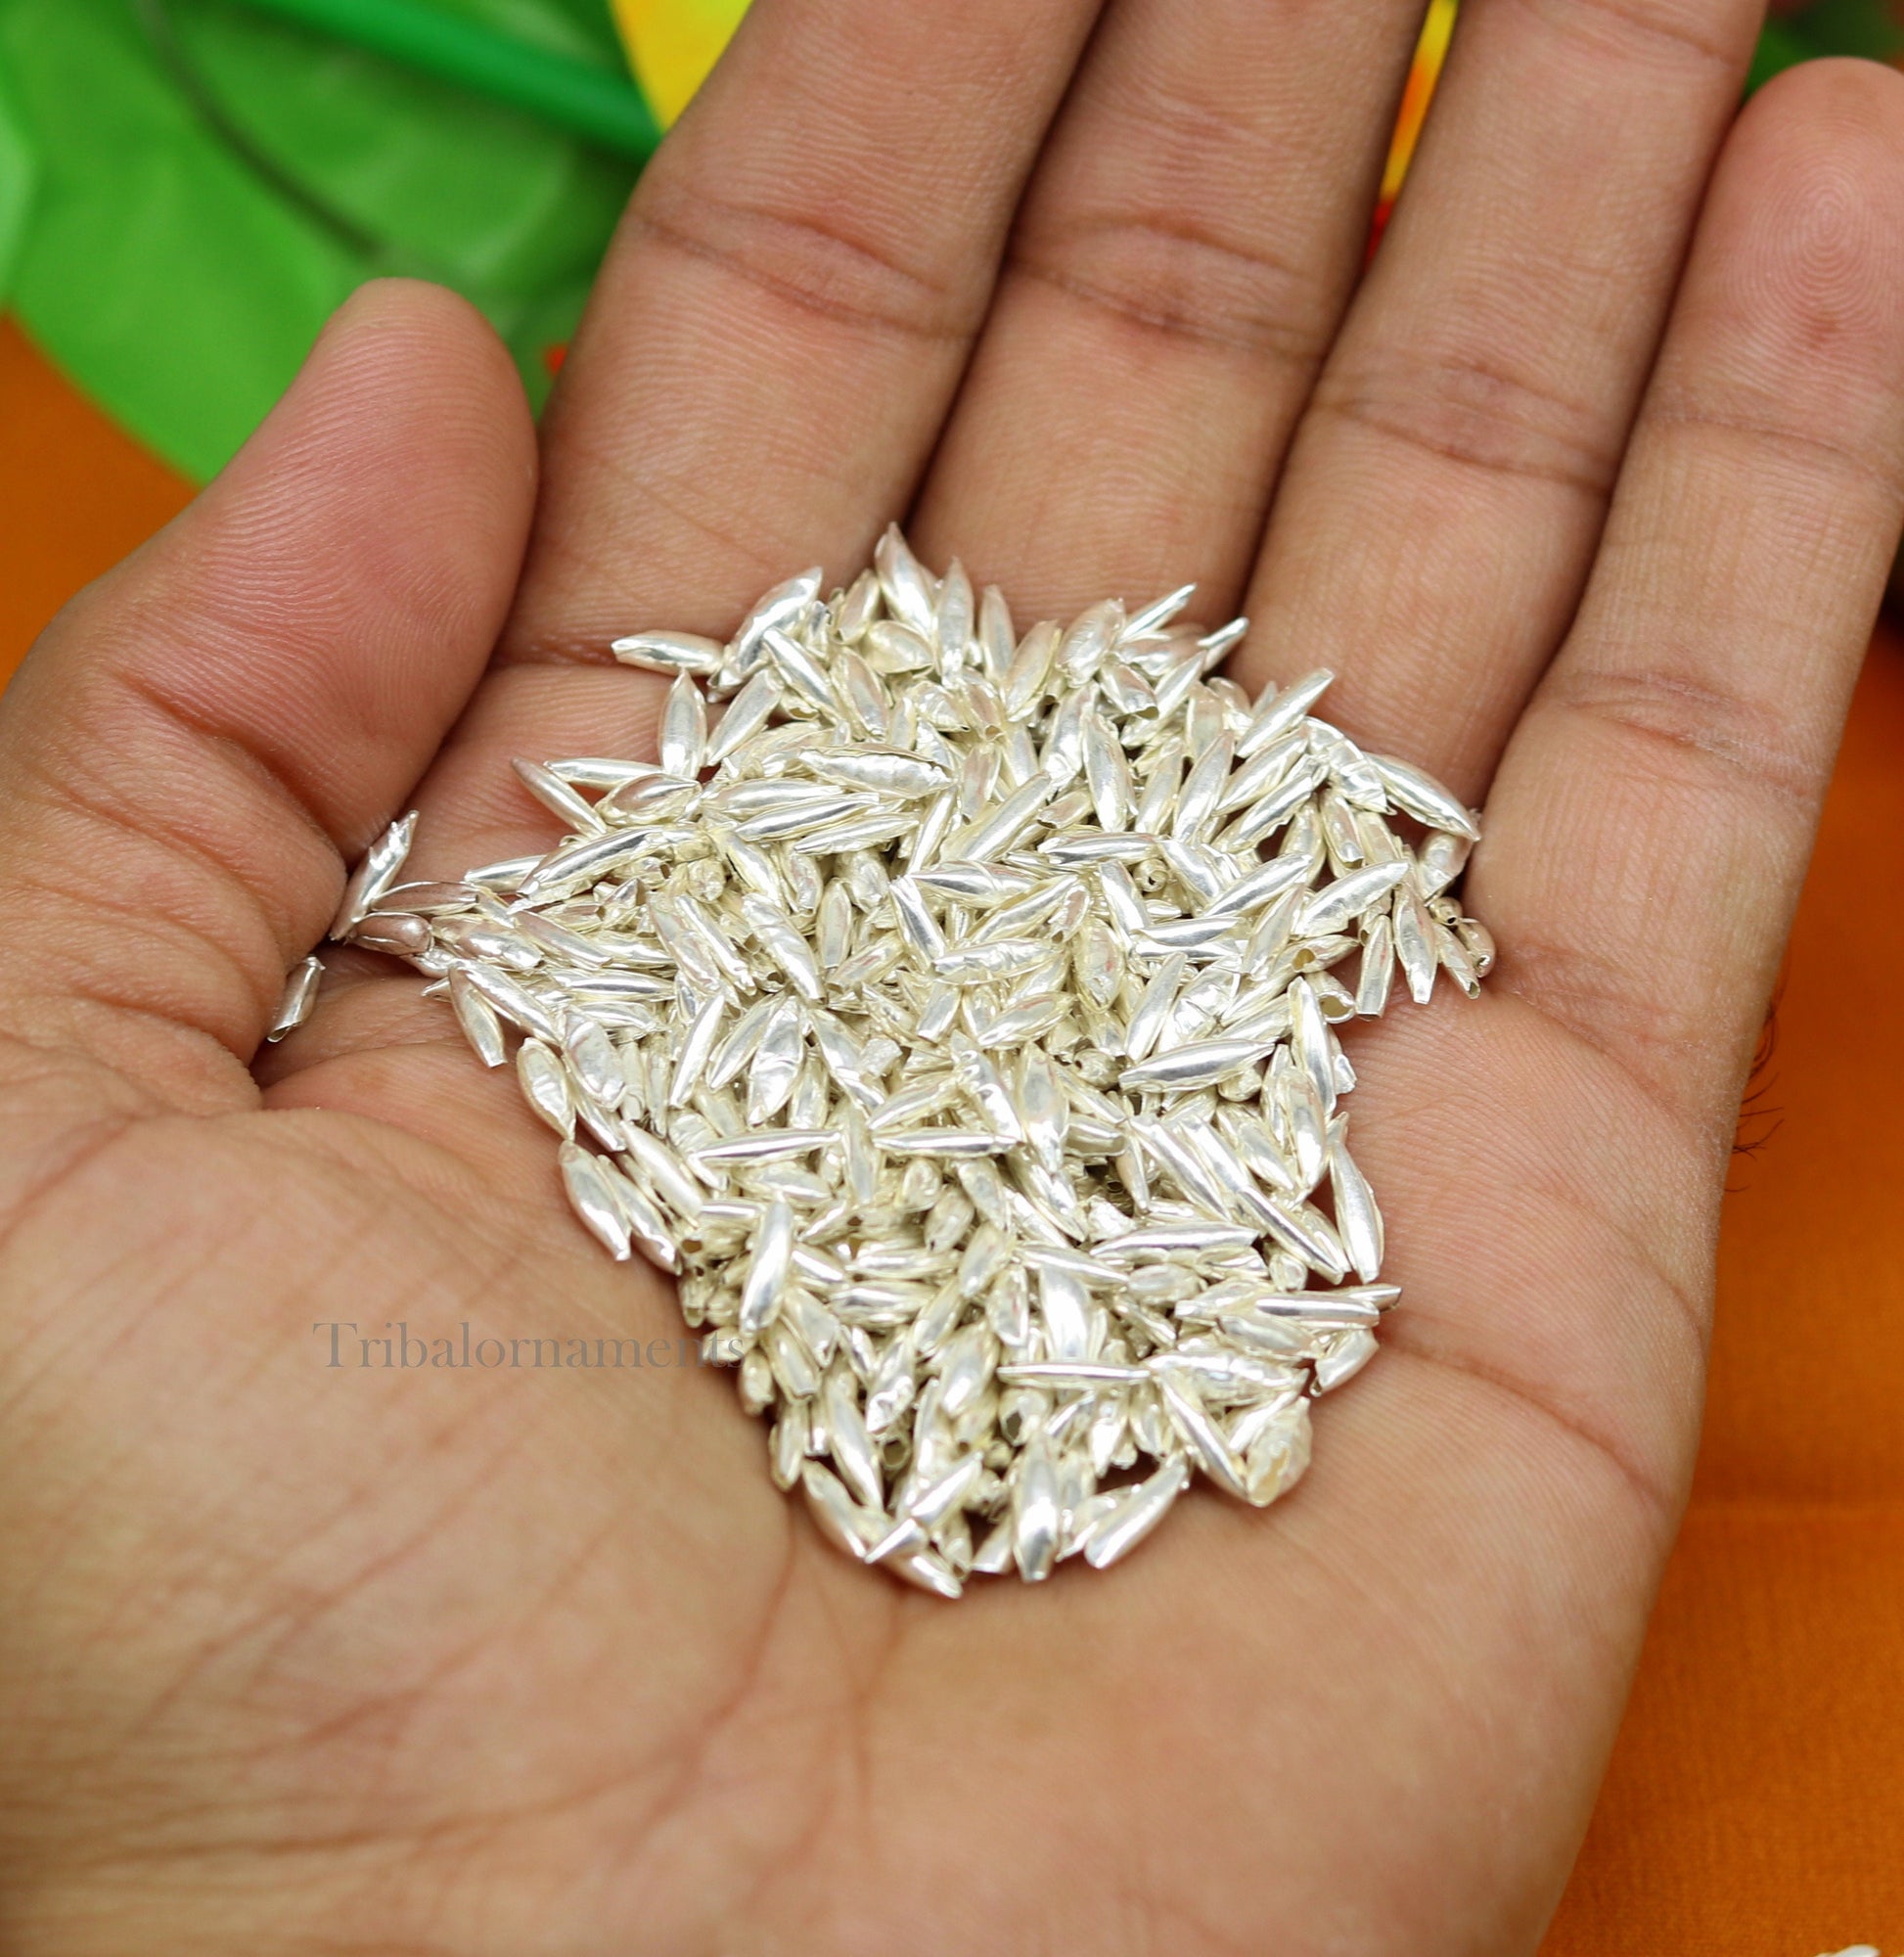 Silver rice silver Akshat, silver chawal for diwali puja, best worshipping silver article tiny silver nuts from india su556 - TRIBAL ORNAMENTS